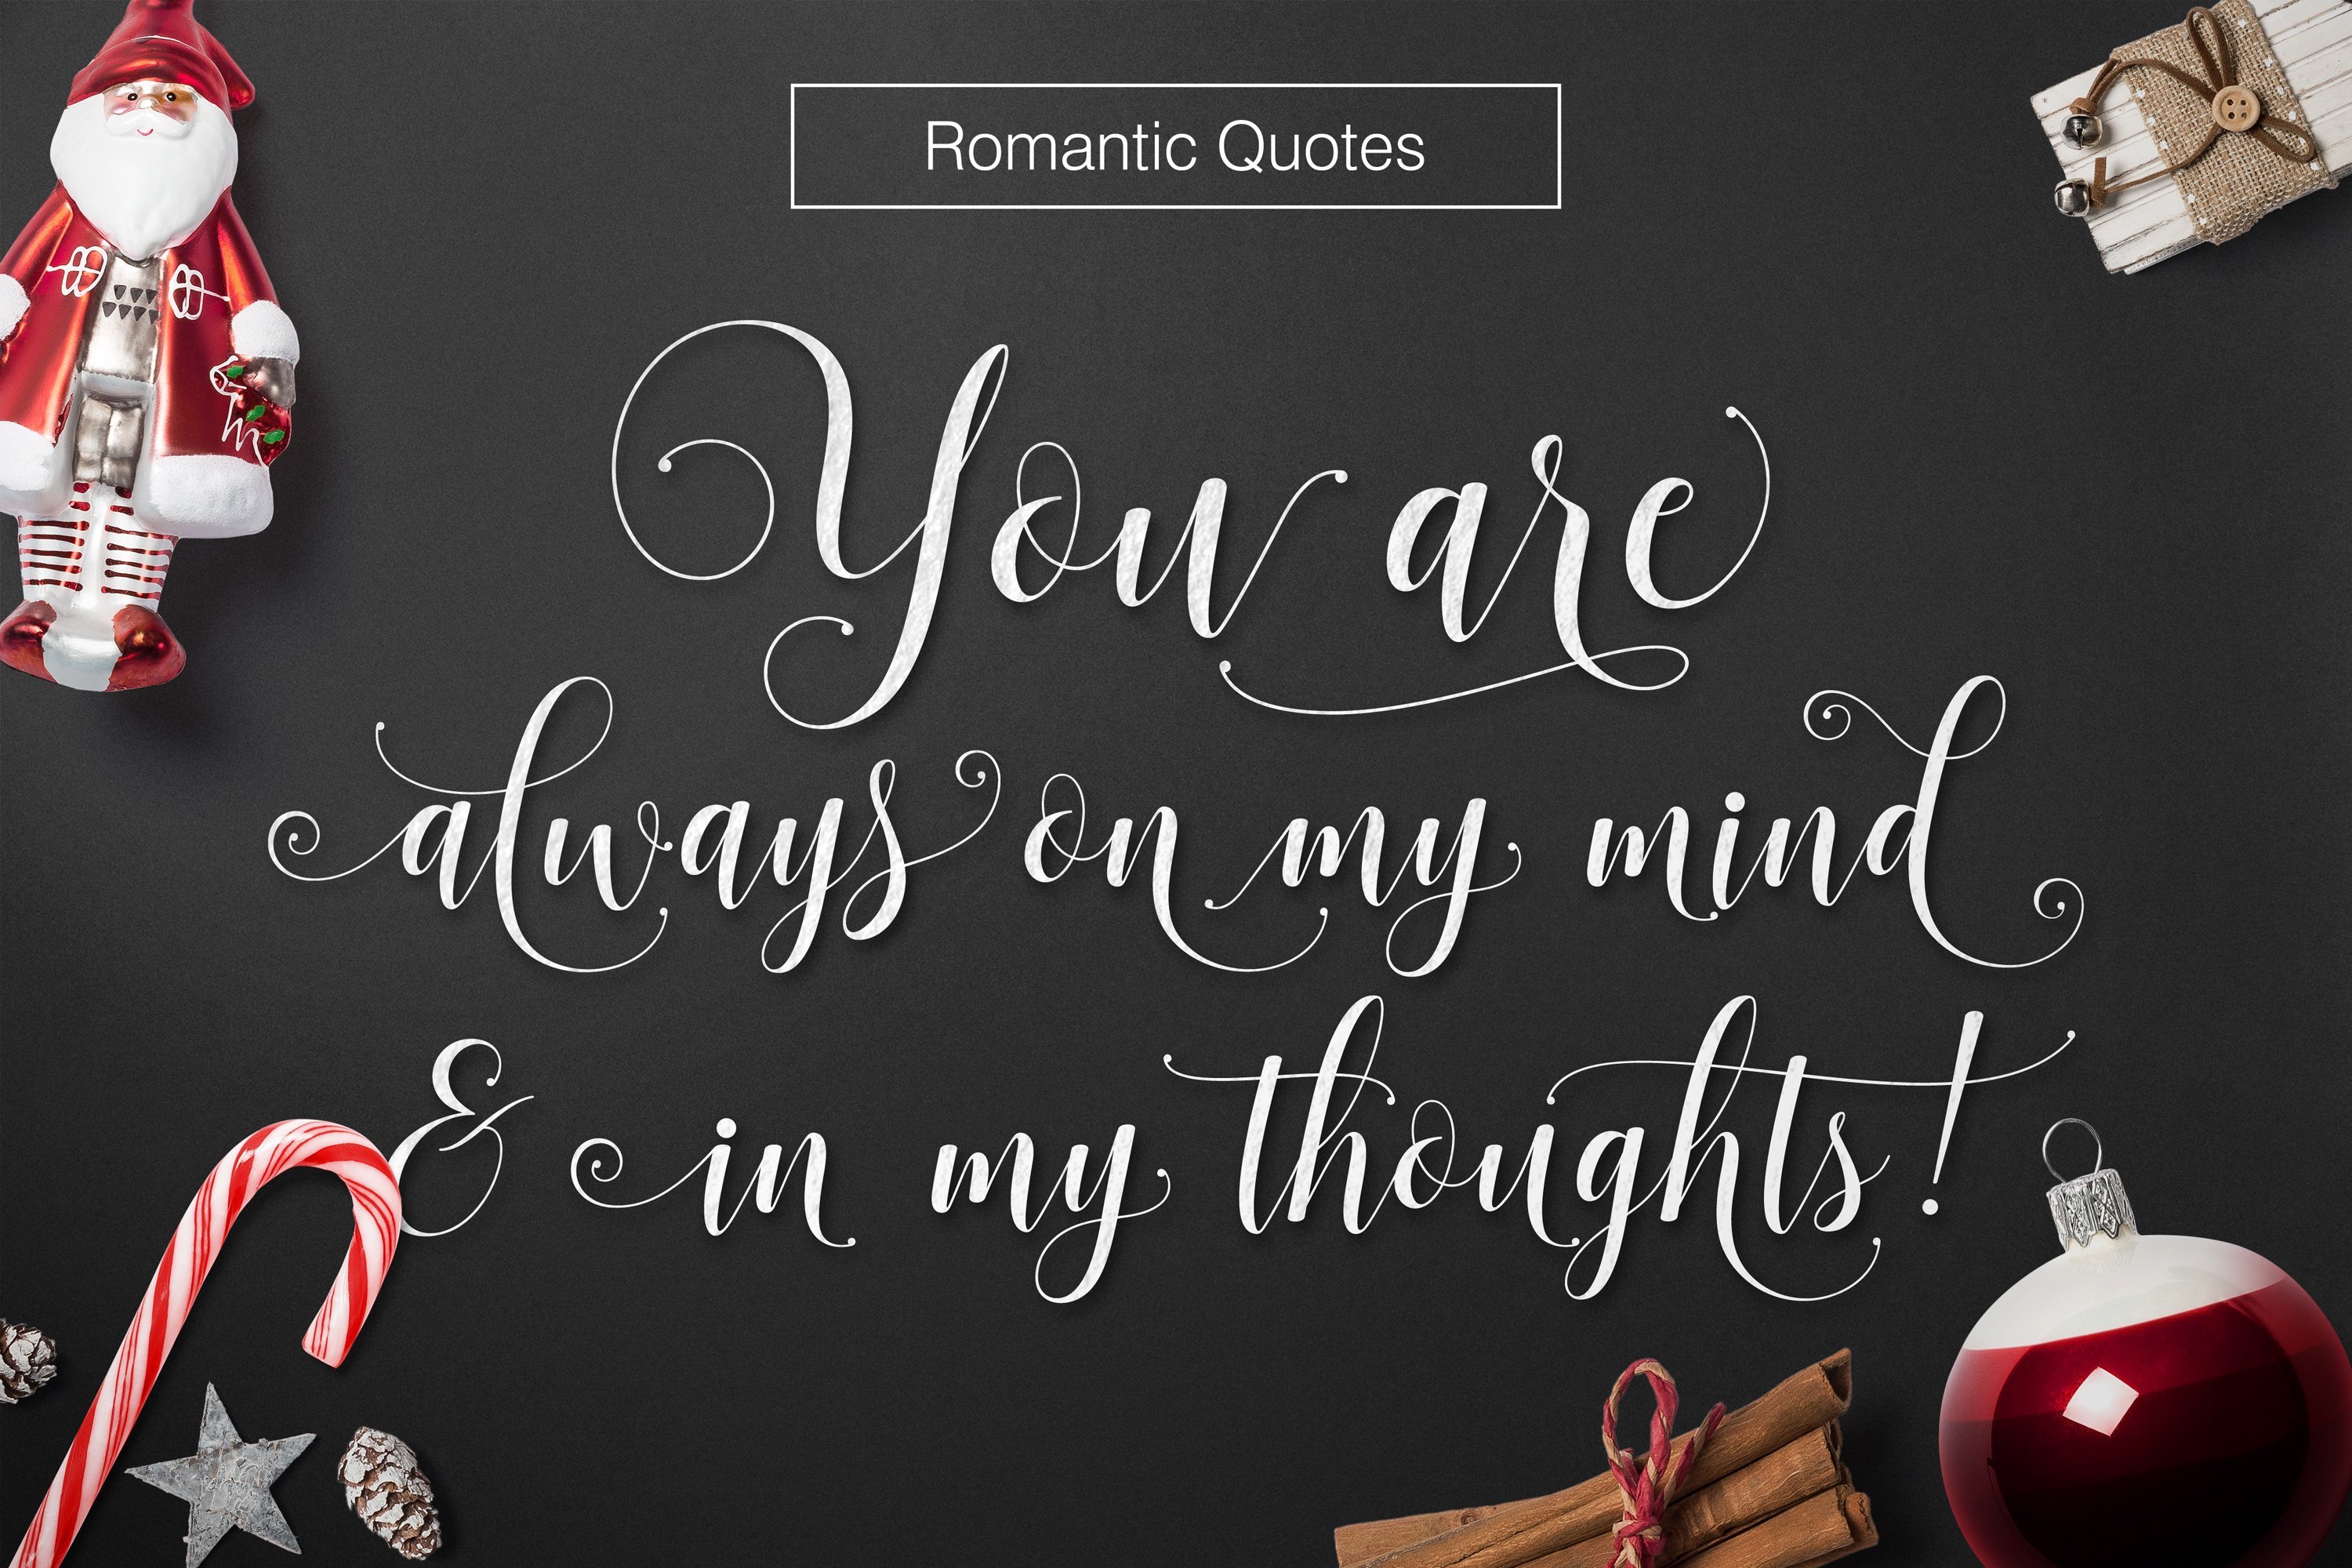 Romantic quotes by this modern Sadhira font.